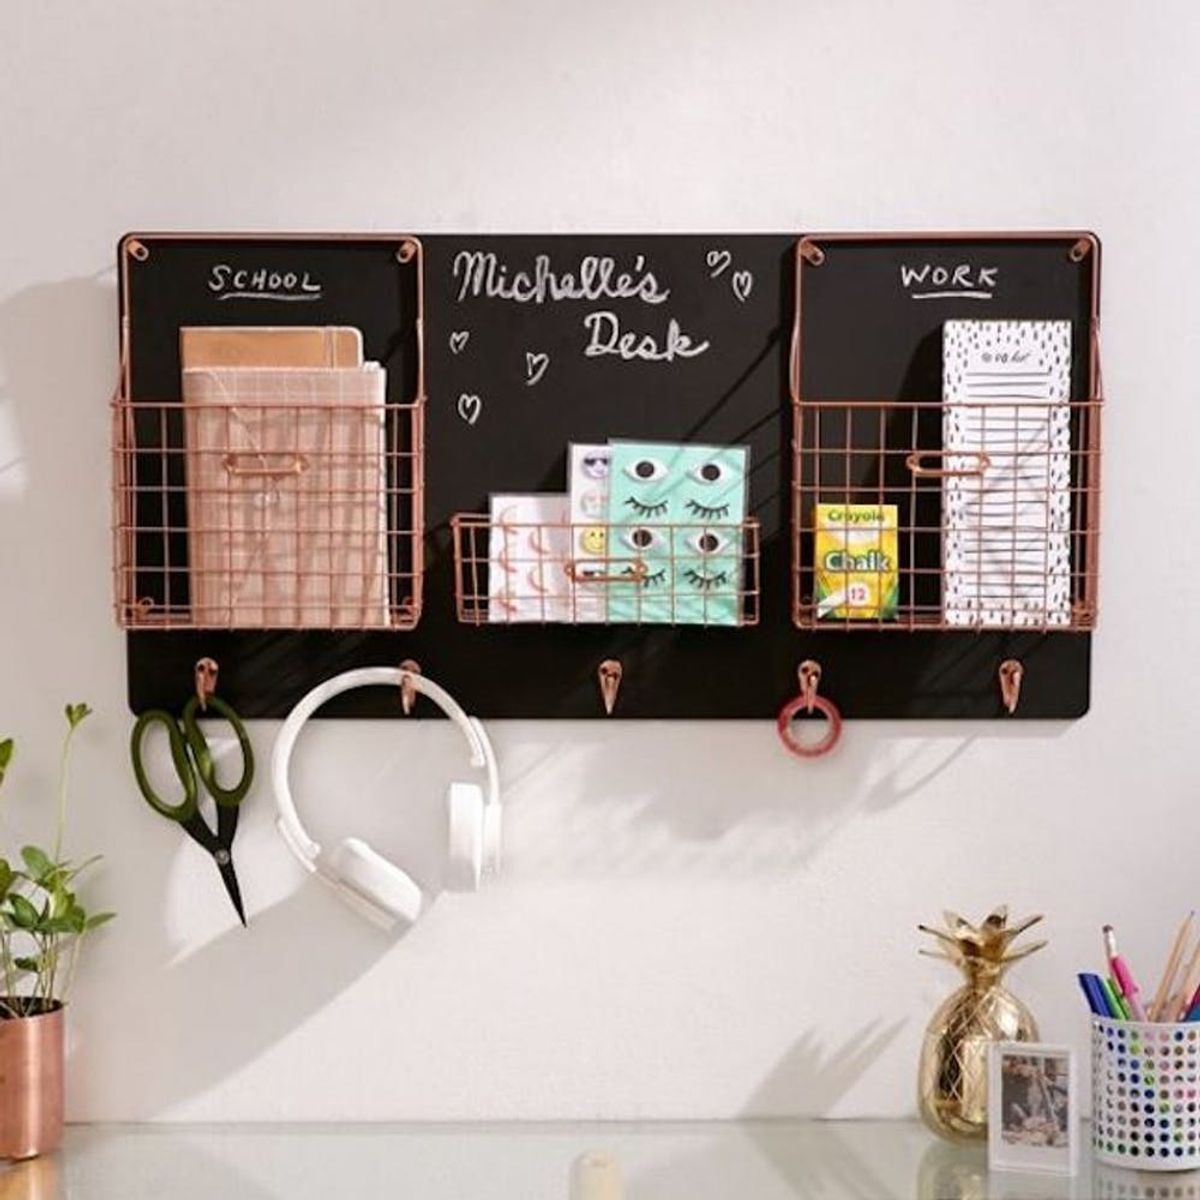 12 Products for People Who Hate Clutter